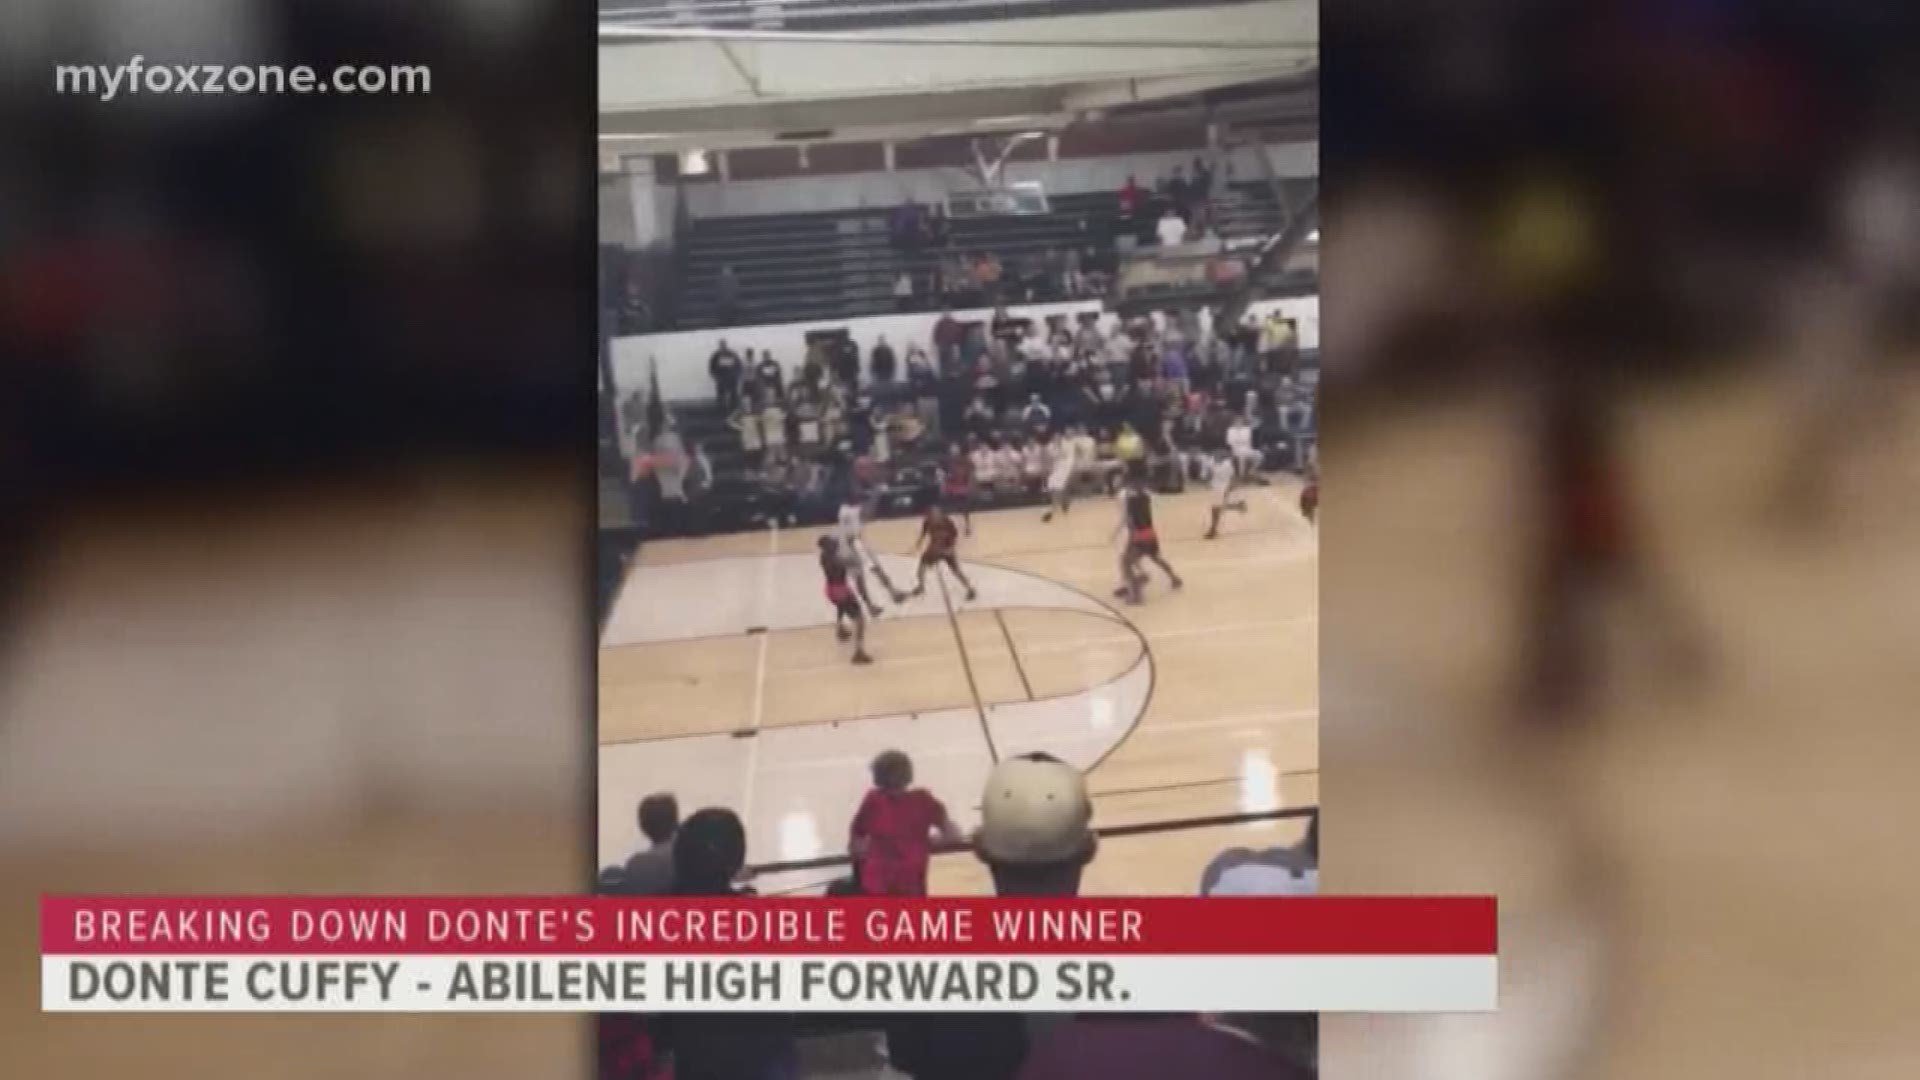 Tied 57-57 with 1.3 seconds left, Abilene High's Donte Cuffy scored an incredible game-winning shot. Our Mitchel Summers caught up with Cuffy to see the play through his eyes.